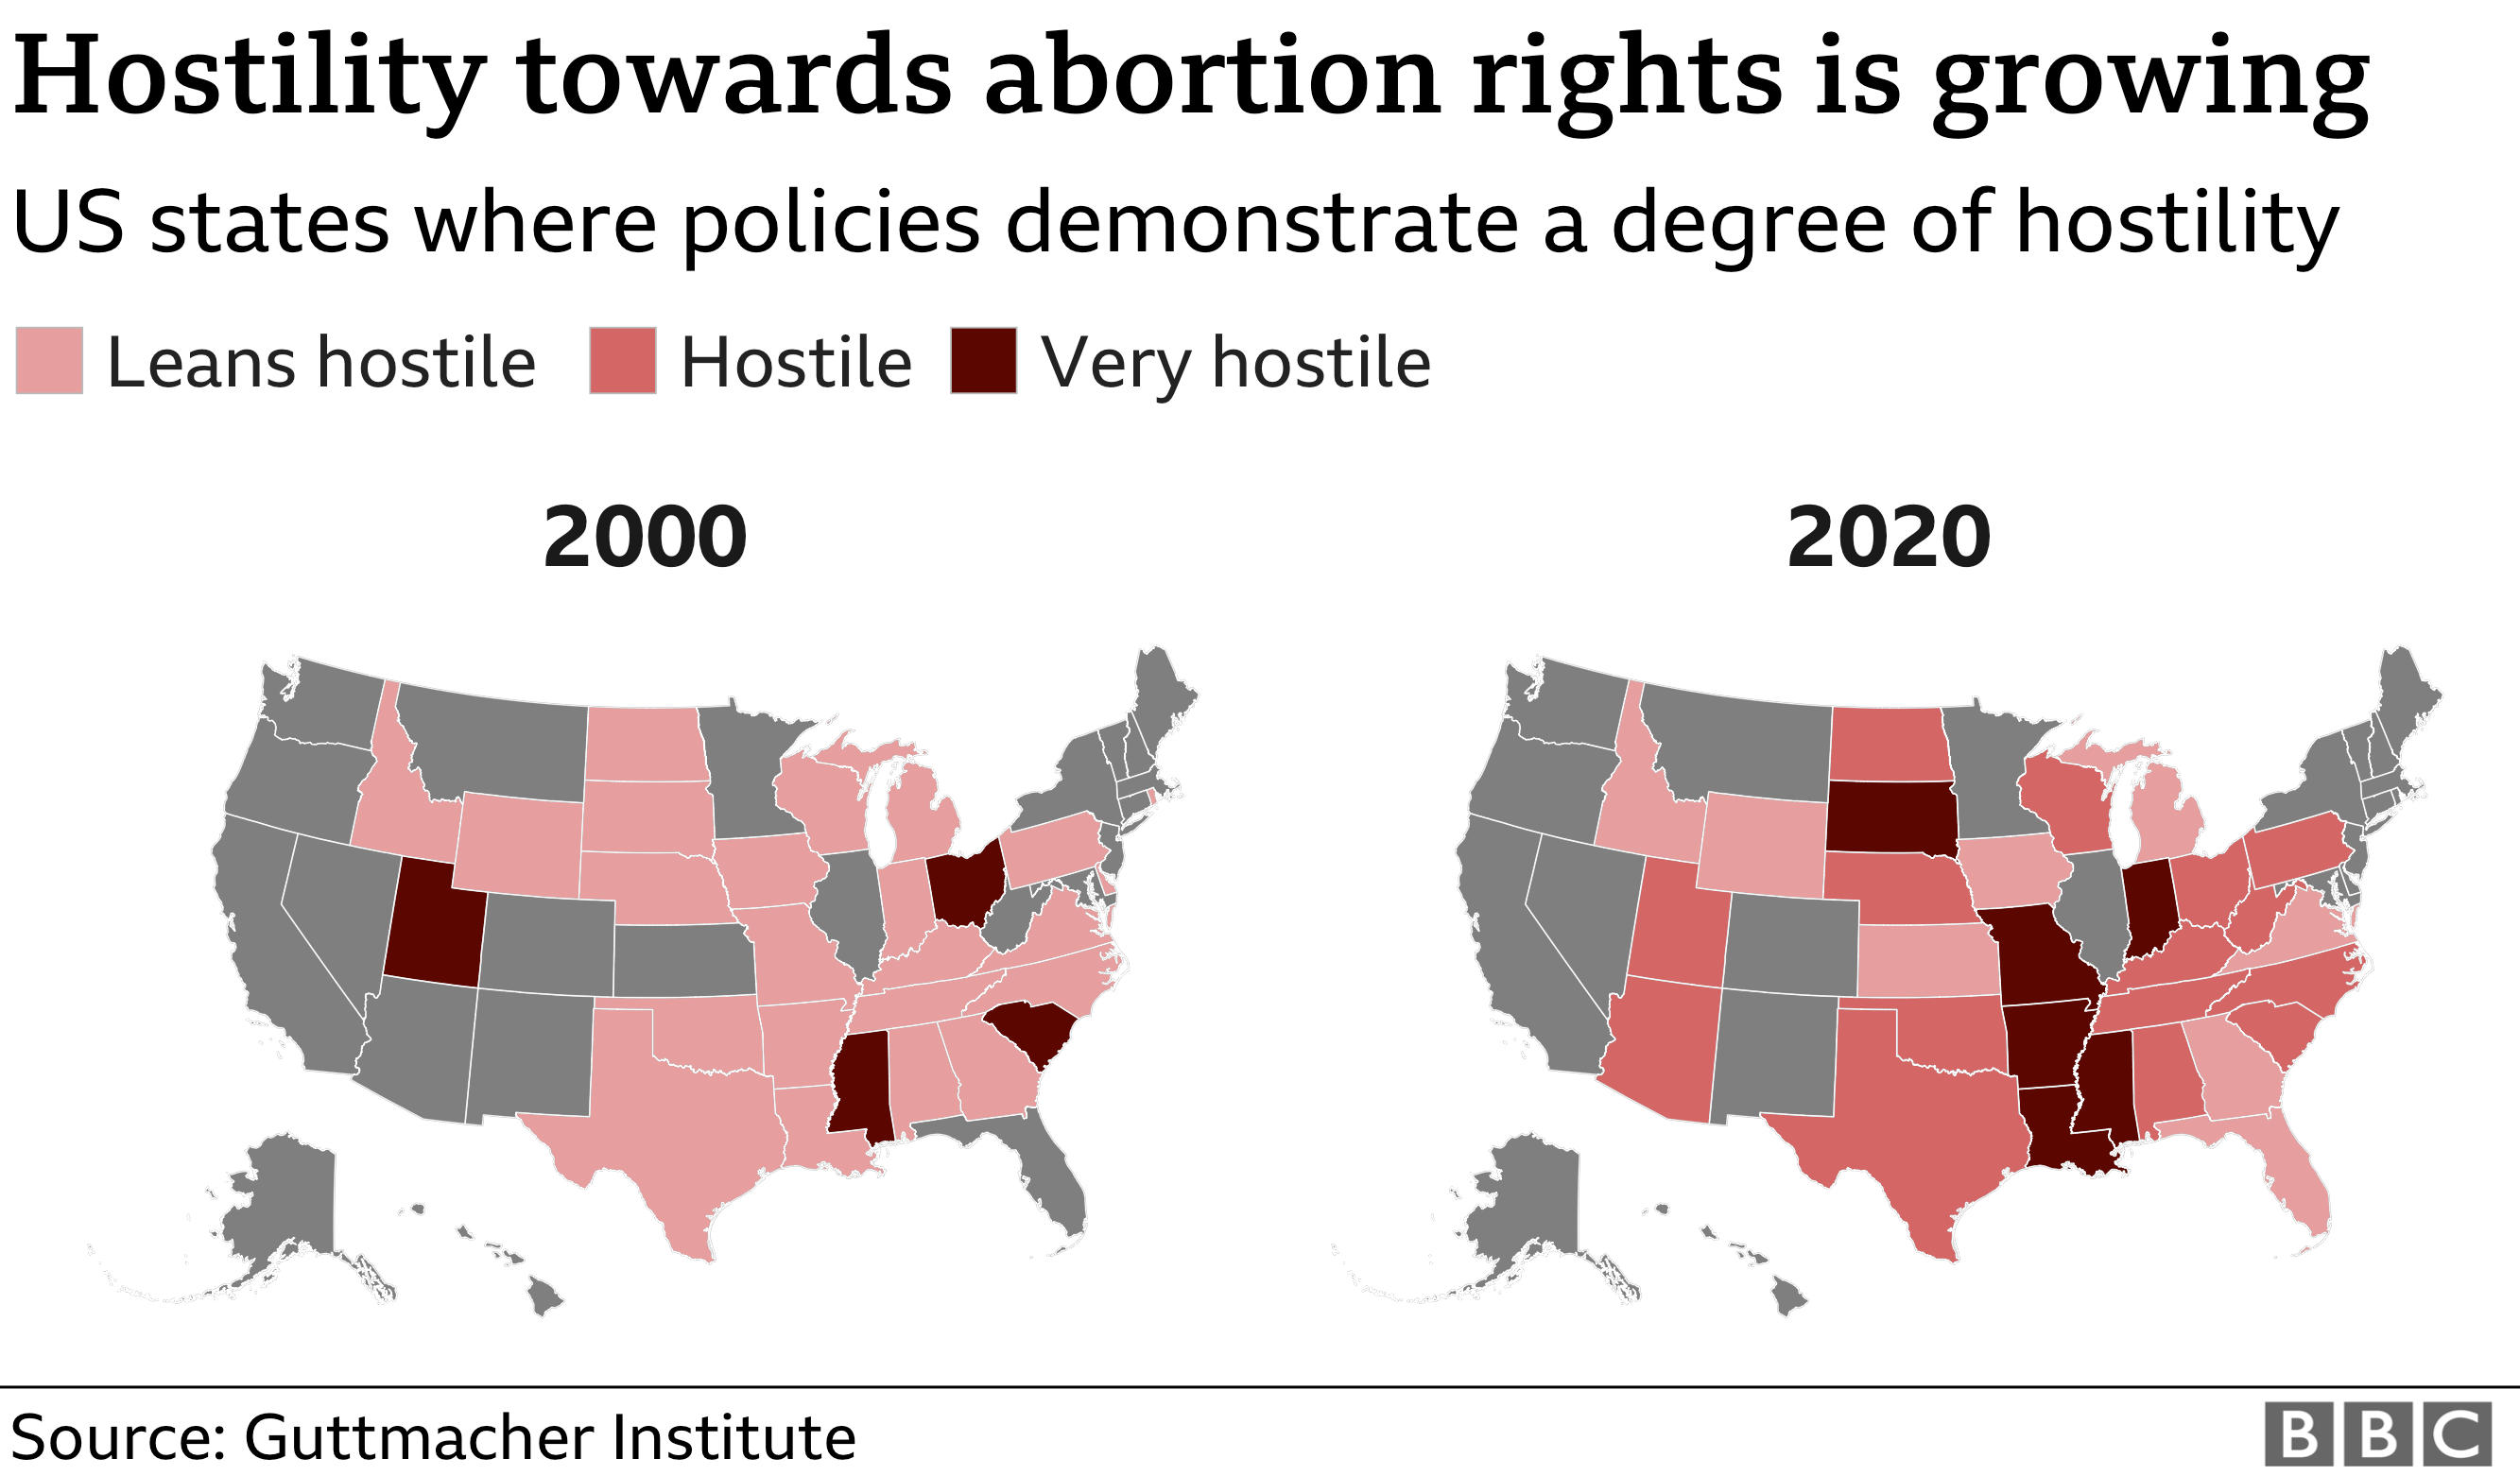 A map showing how abortion laws have become more restrictive in the past 2 decades